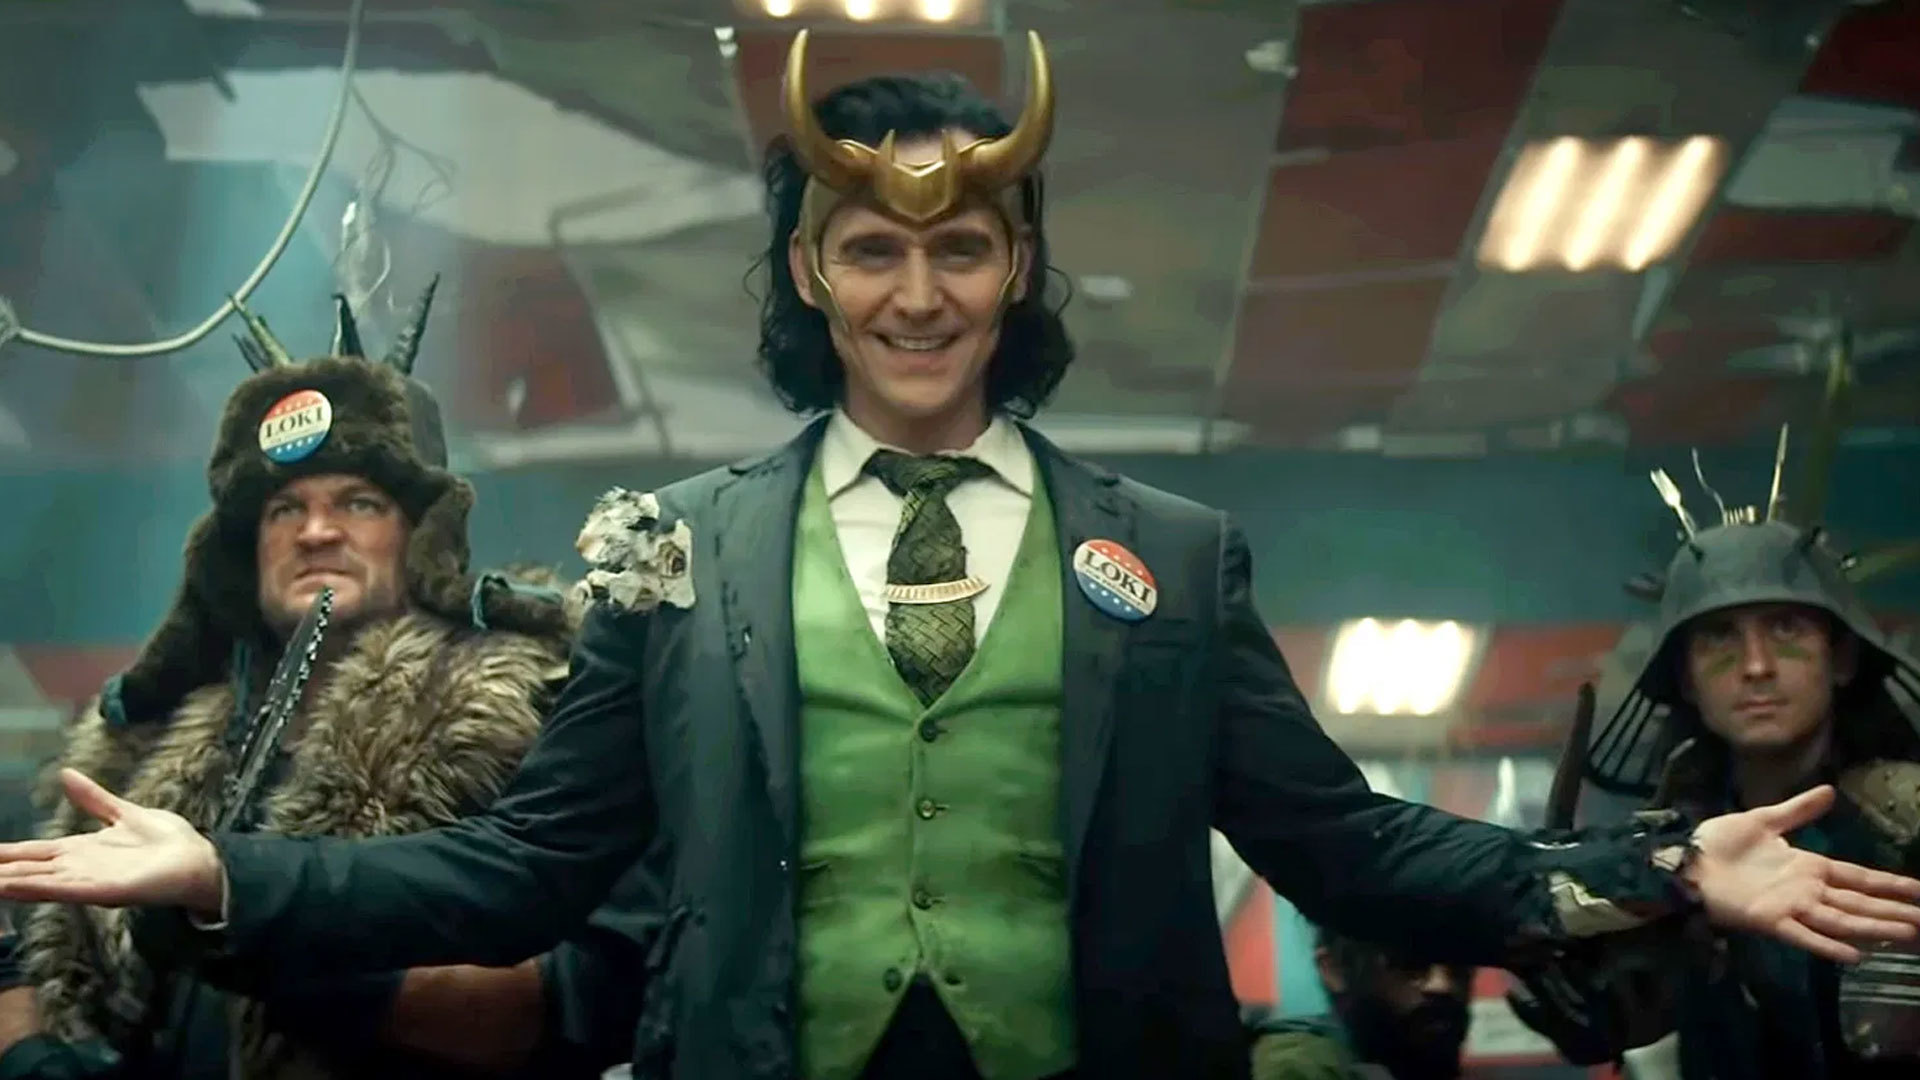 Loki, the God of Mischief - Marvel Cinematic Universe. Image used under ‘free use’. See footnotes for attribution